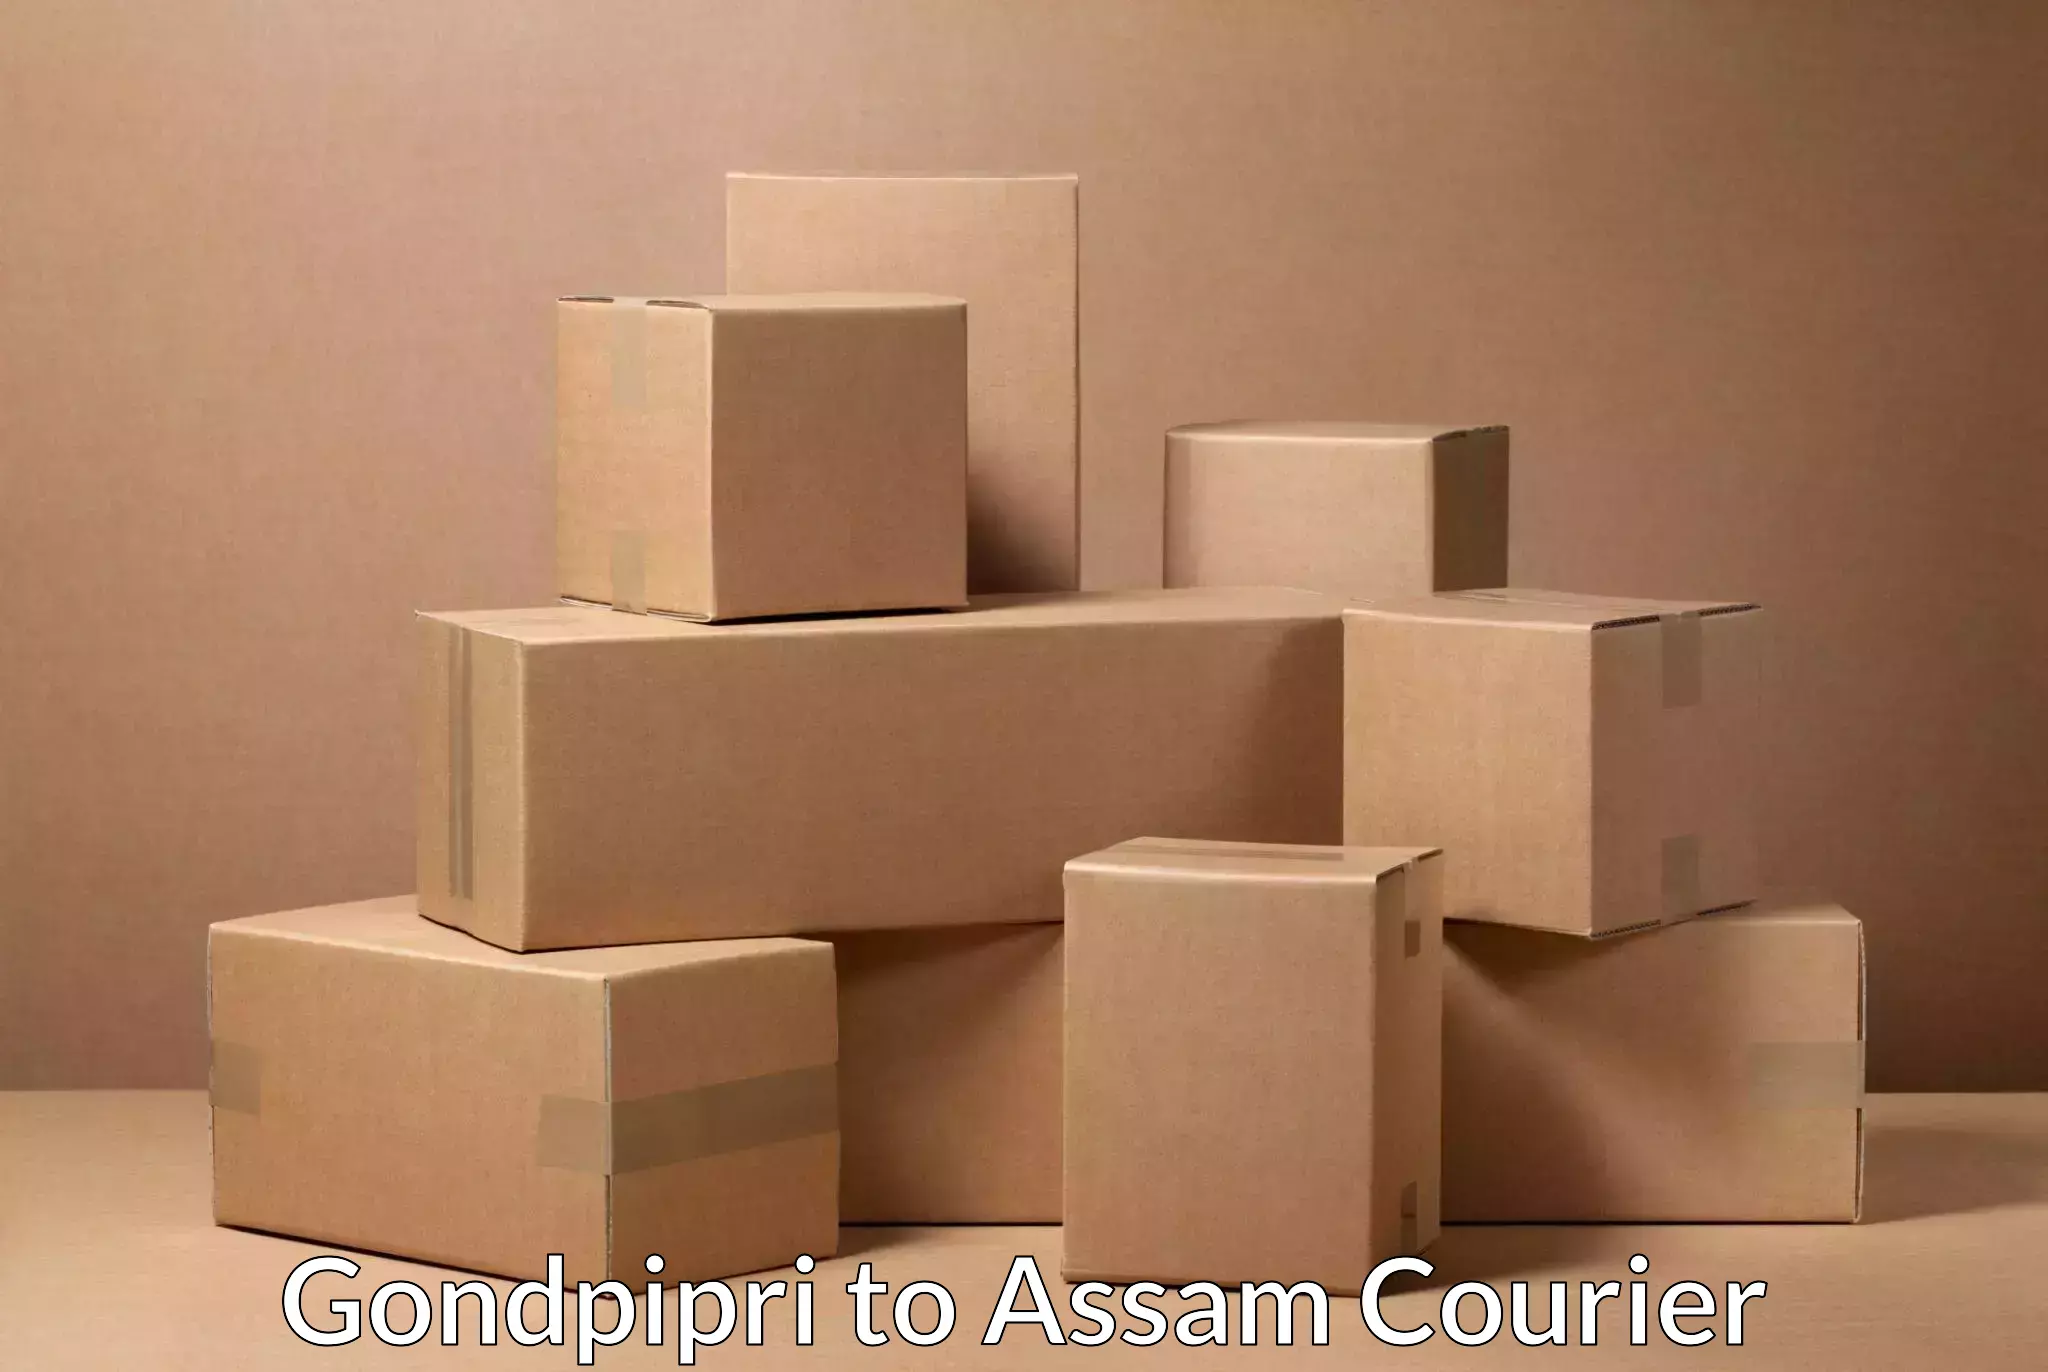 Automated shipping processes Gondpipri to Assam